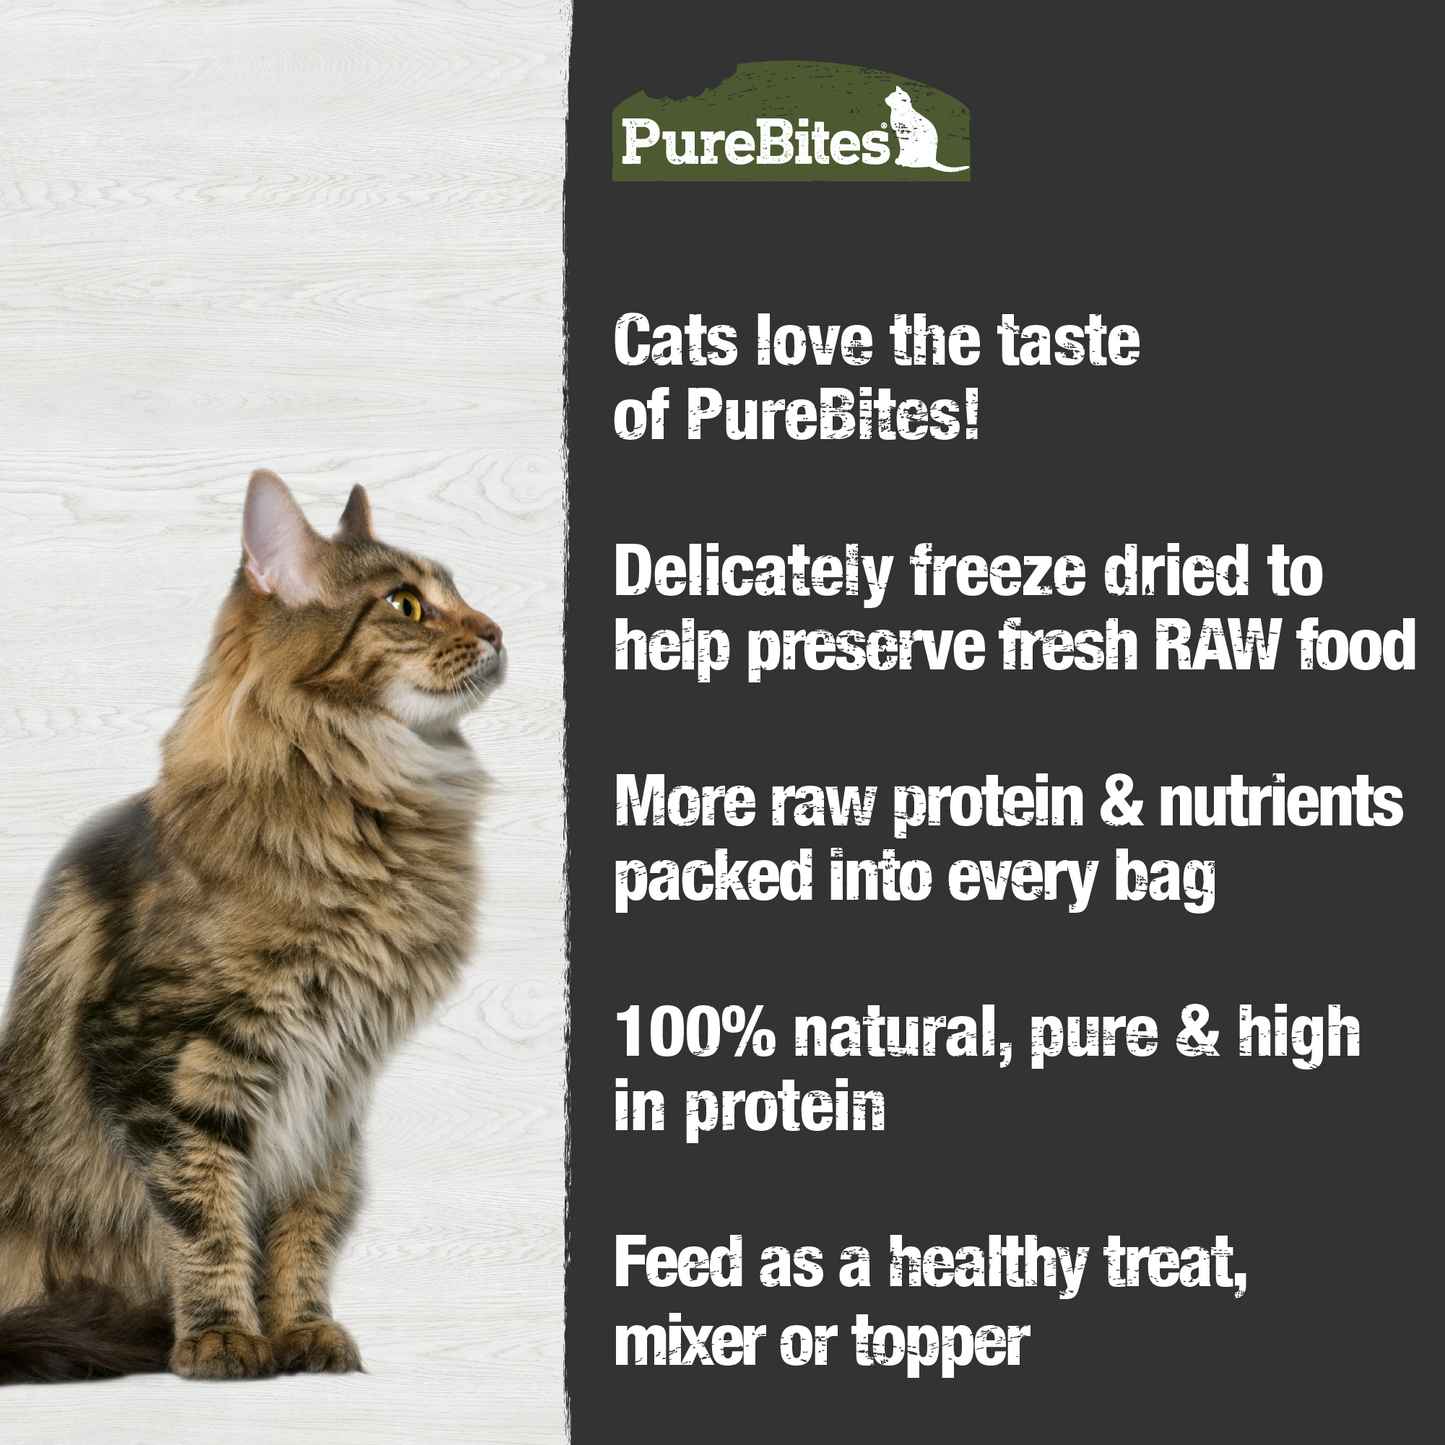 Made fresh & pure means more RAW protein and nutrients packed into every bag. Our beef liver is freeze dried to help preserve its RAW taste, and nutrition, and mirror a cat’s ancestral diet